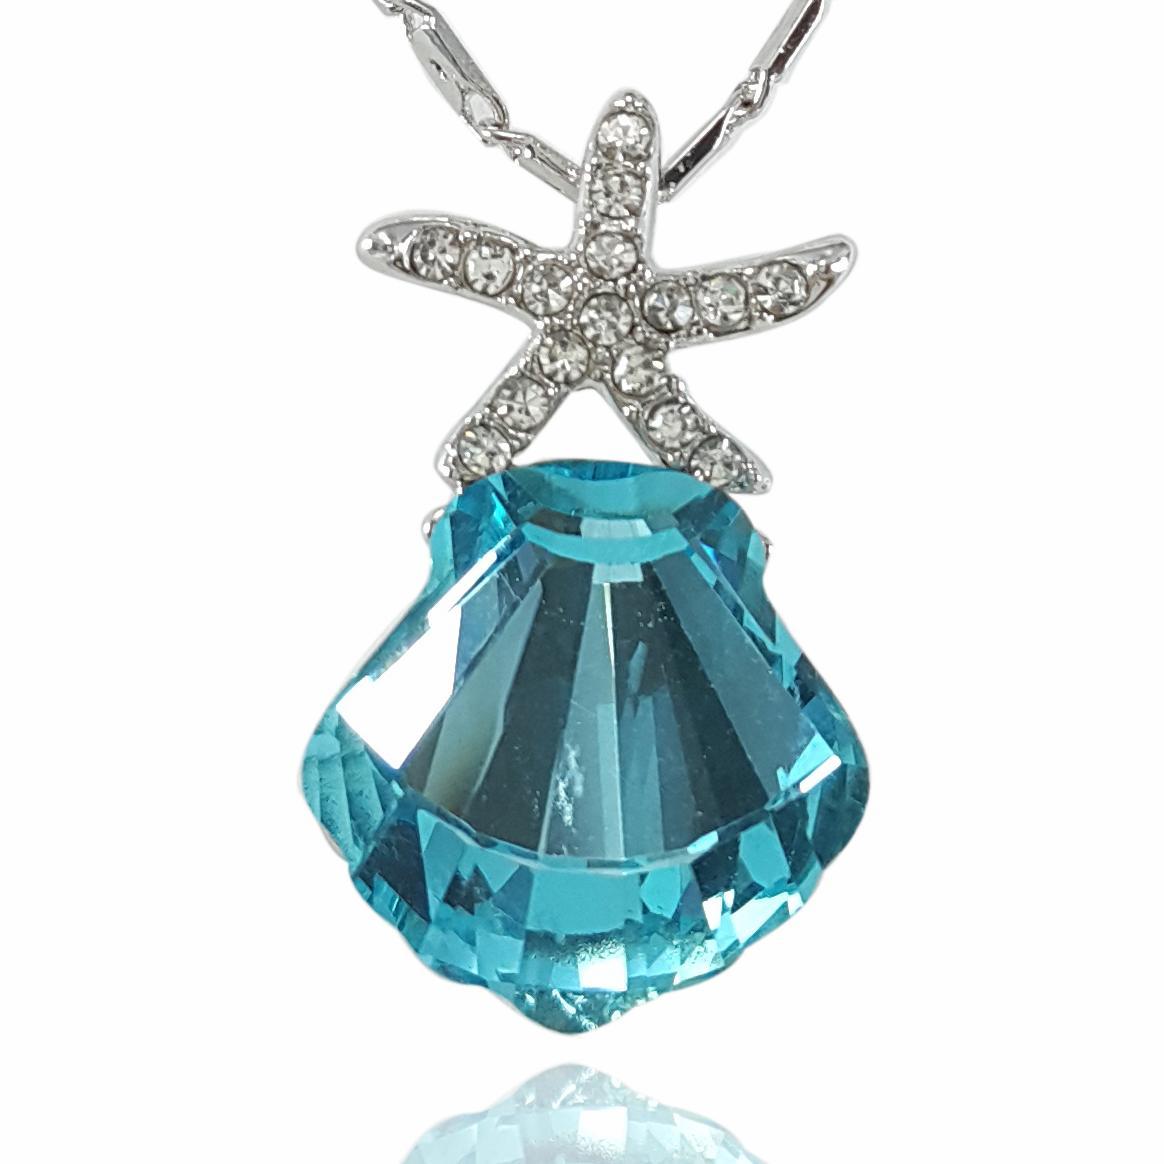 Sparkling, Shinny #Pendants #FashionJewelry for you to wear everyday, makes you looks beautiful in instant!